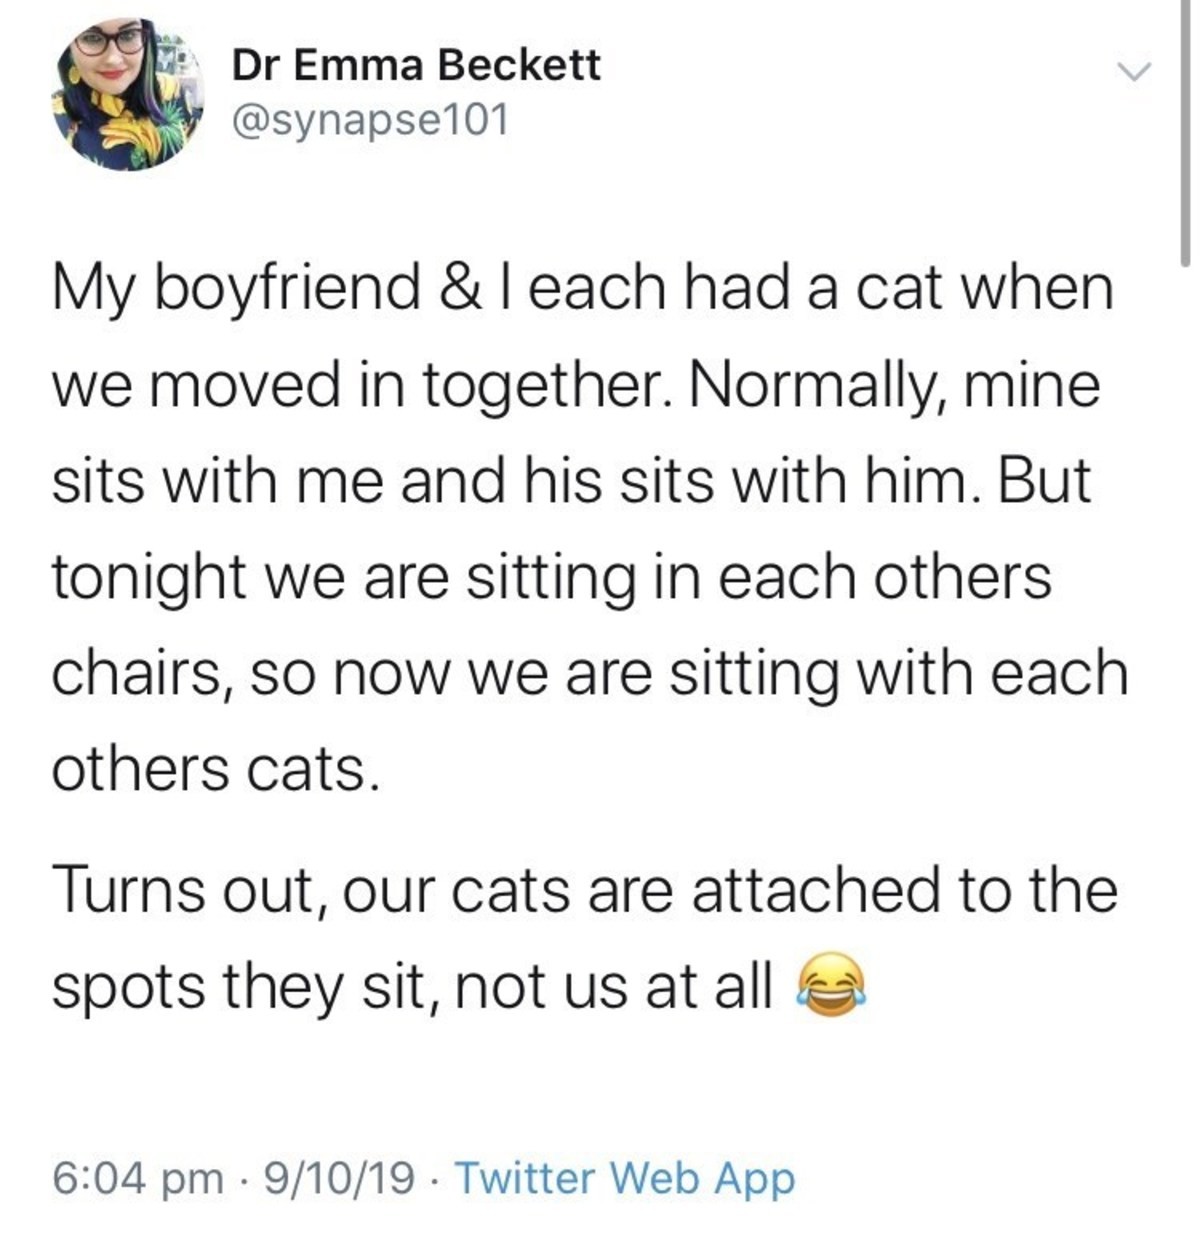 Typical Cats. .. speak 4urself, literally anywhere i sleep in the house, my cat will sleep with me. i even had a hammock set up outside for a while and slept in it some, my cat 